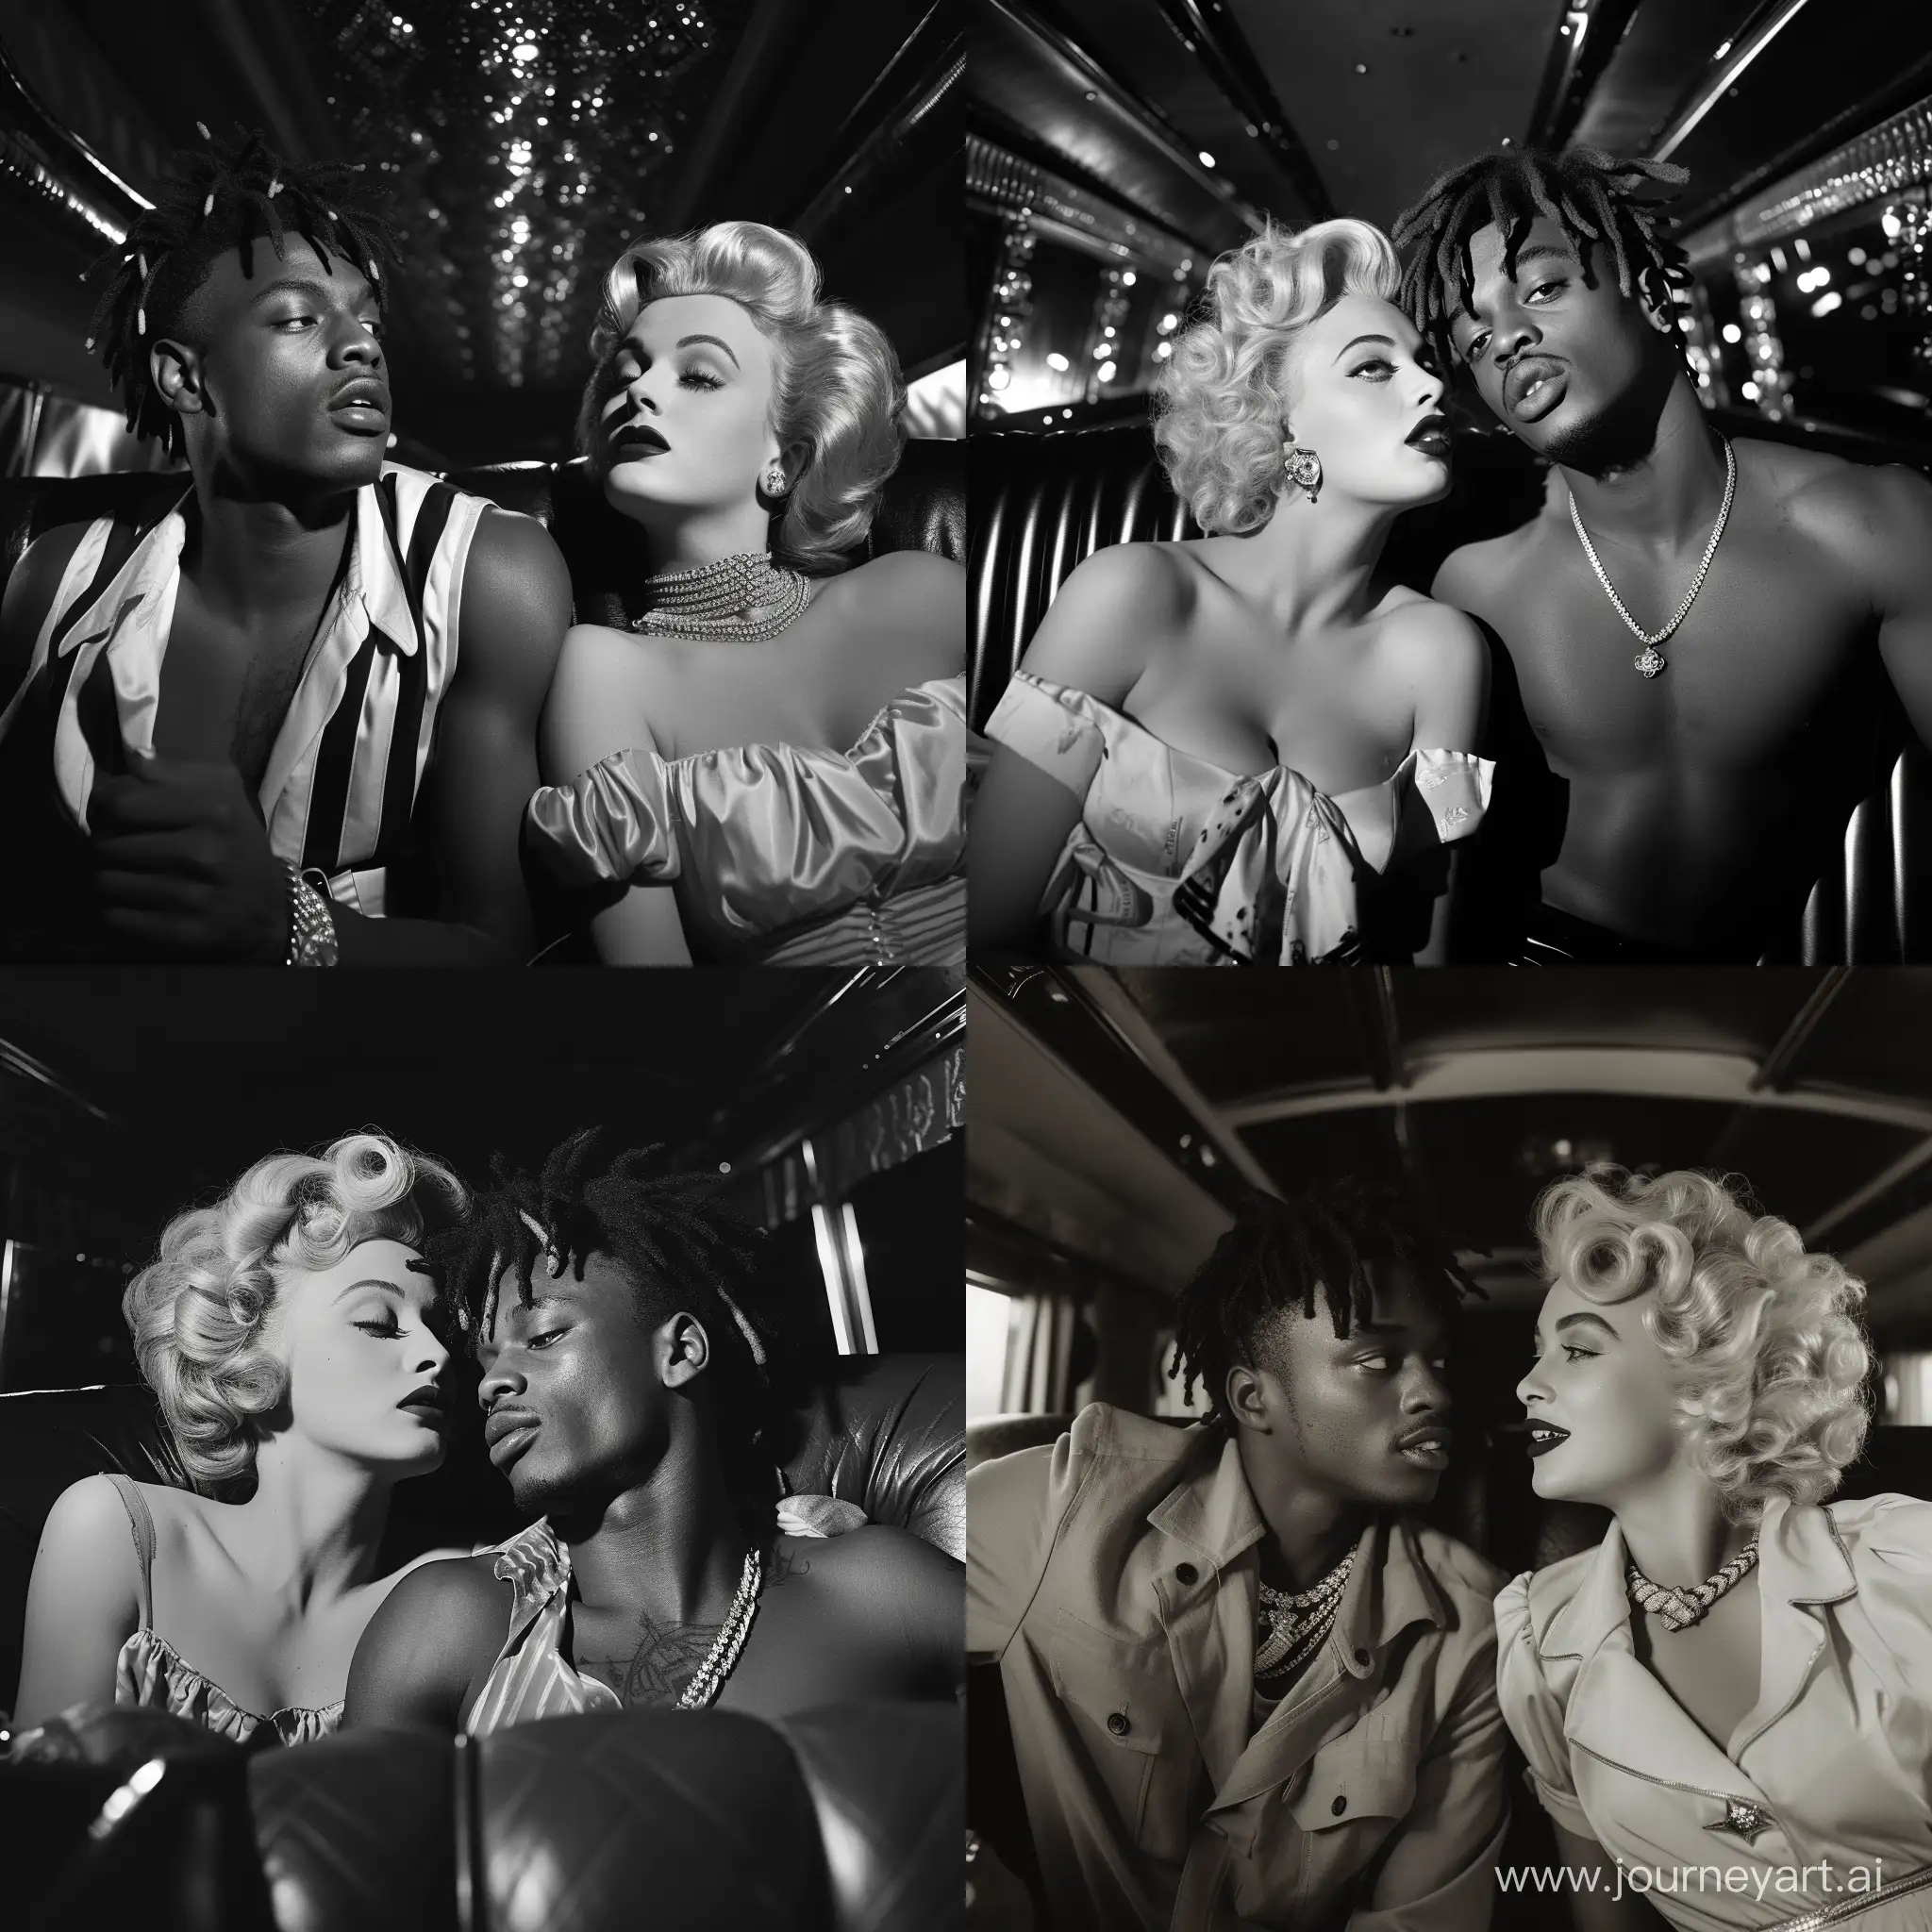 Vintage-Love-Juice-WRLD-and-Marilyn-Monroe-in-a-1950s-Limousine